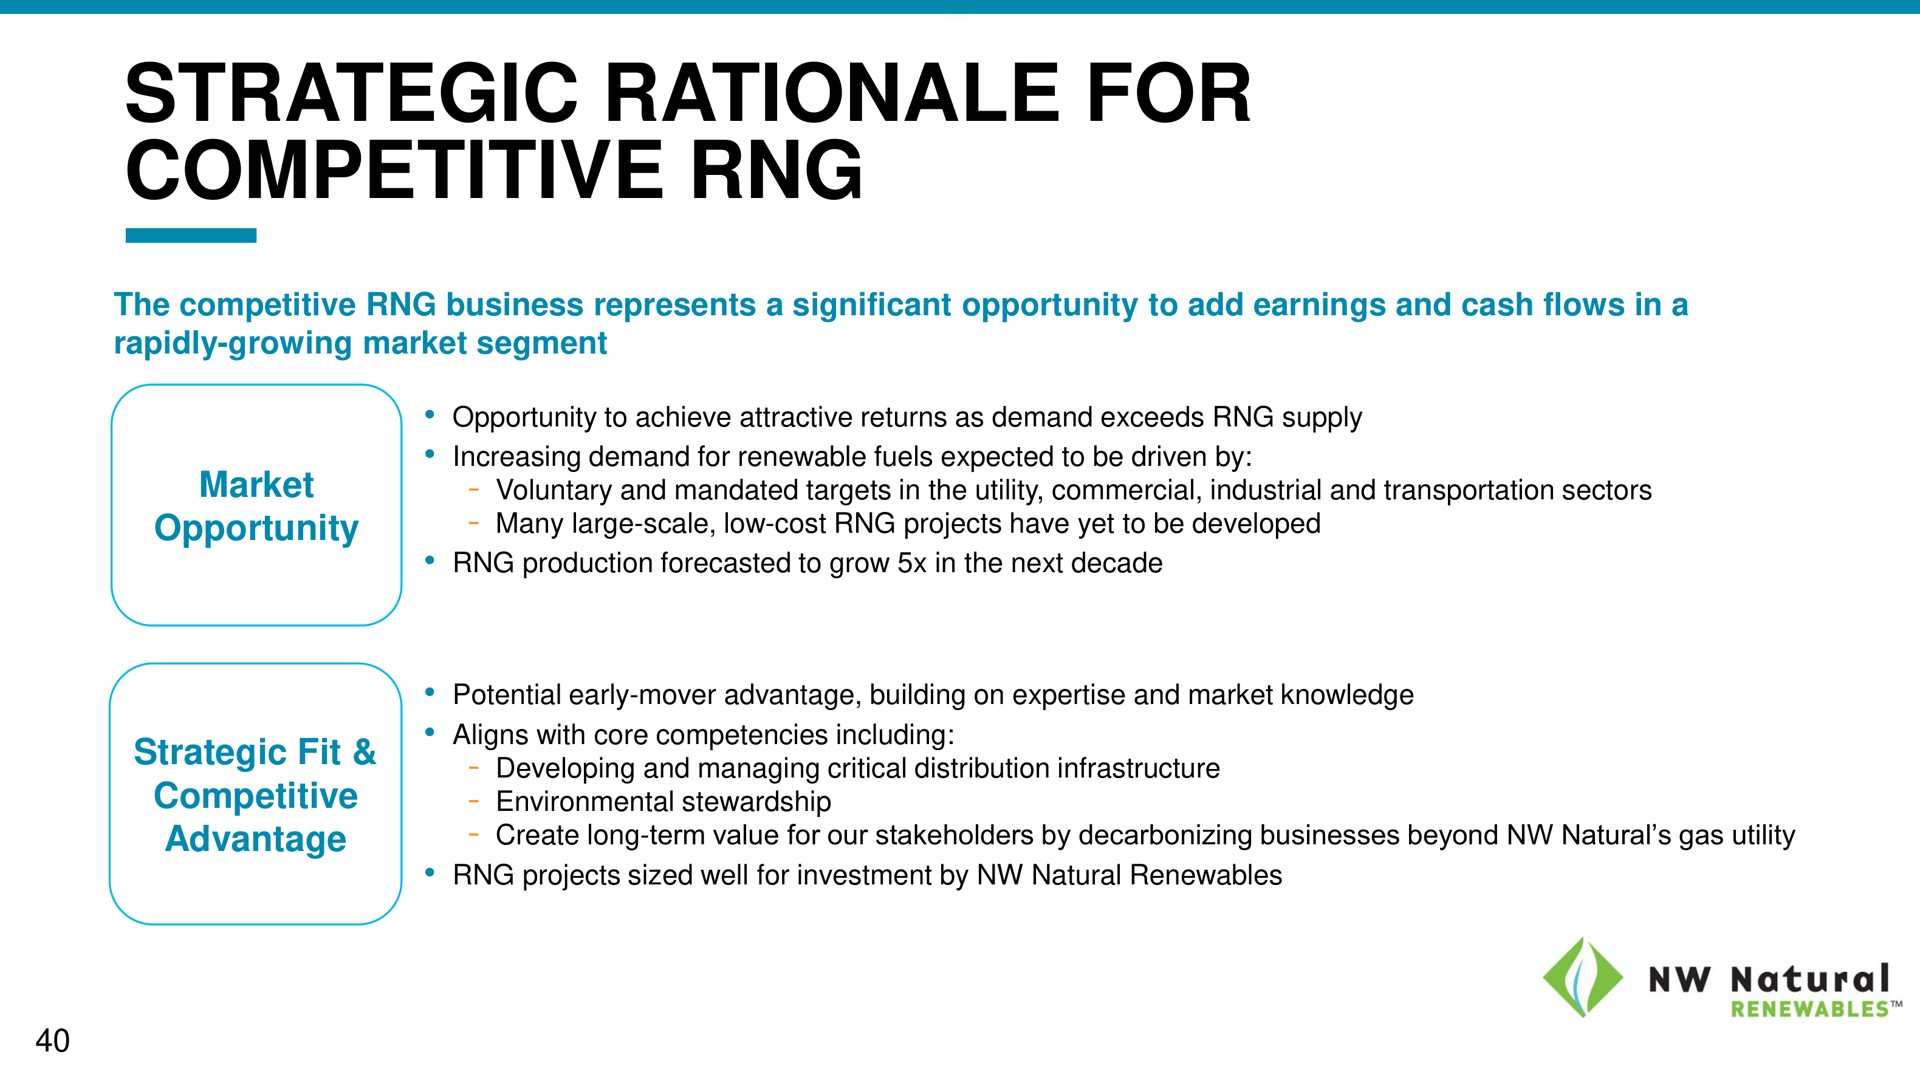 strategic rationale for competitive | NW Natural Holdings